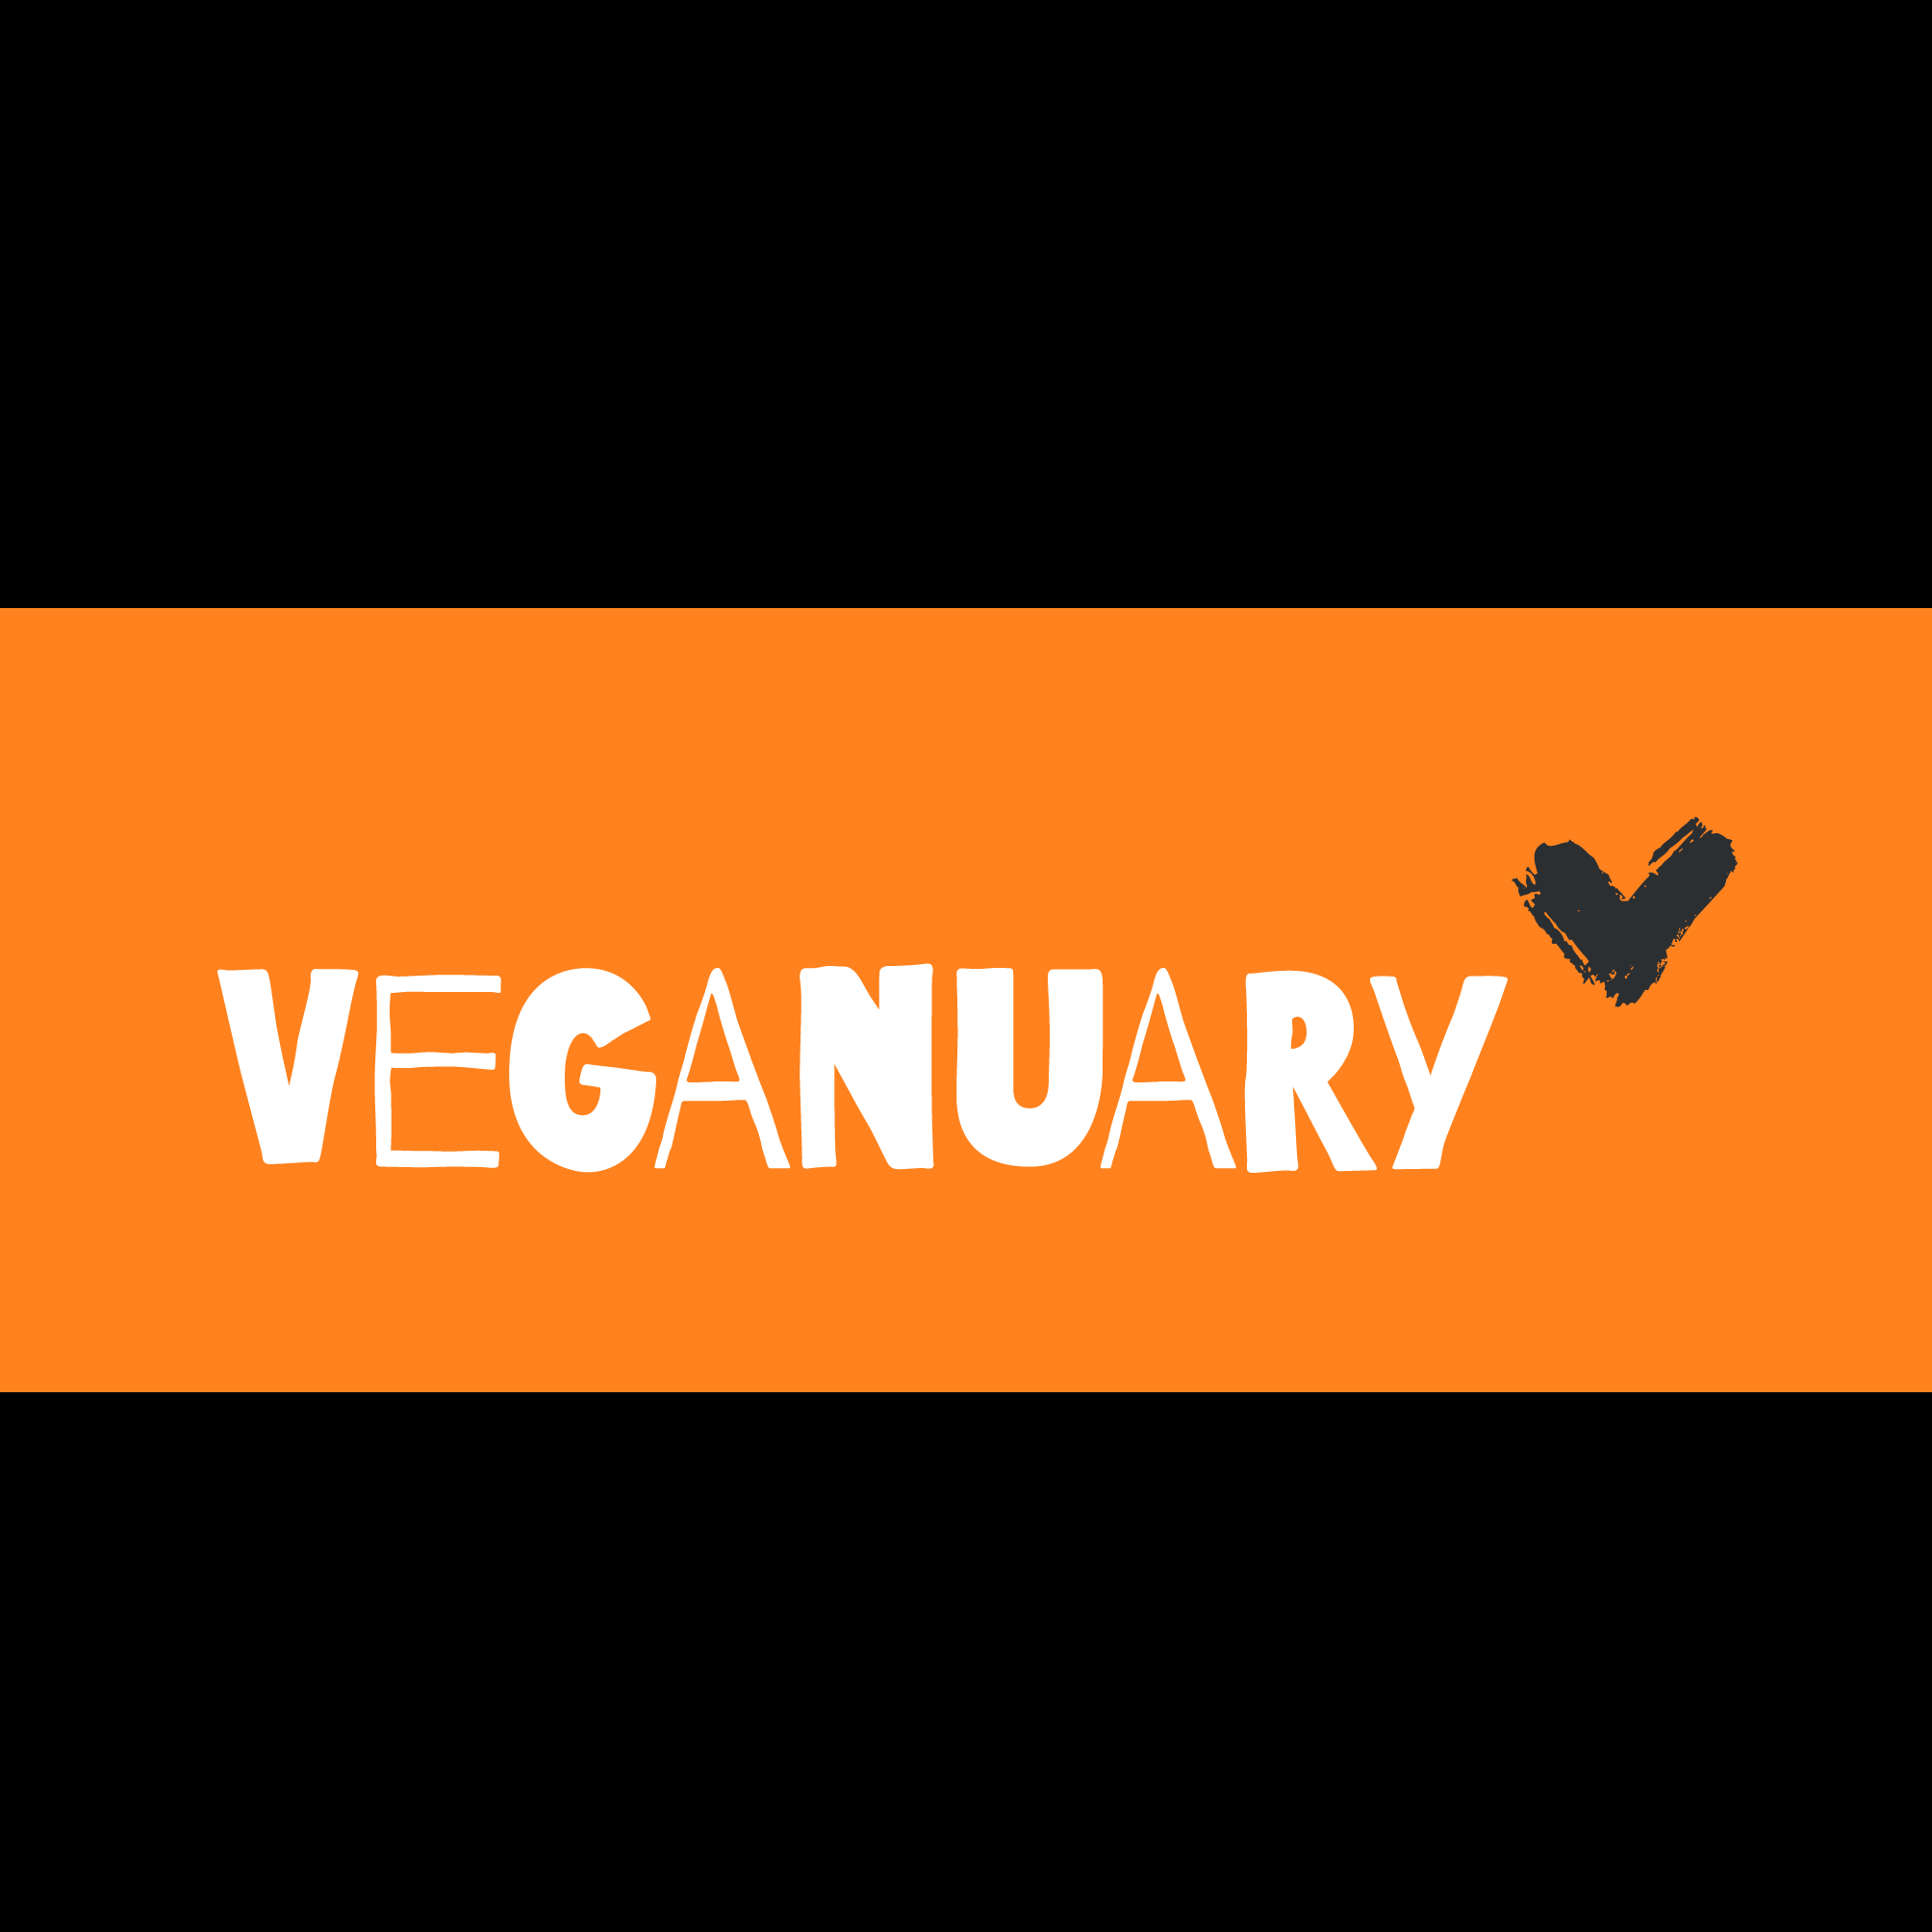 It’s a New Year’s Revolution! Veganuary and Beer